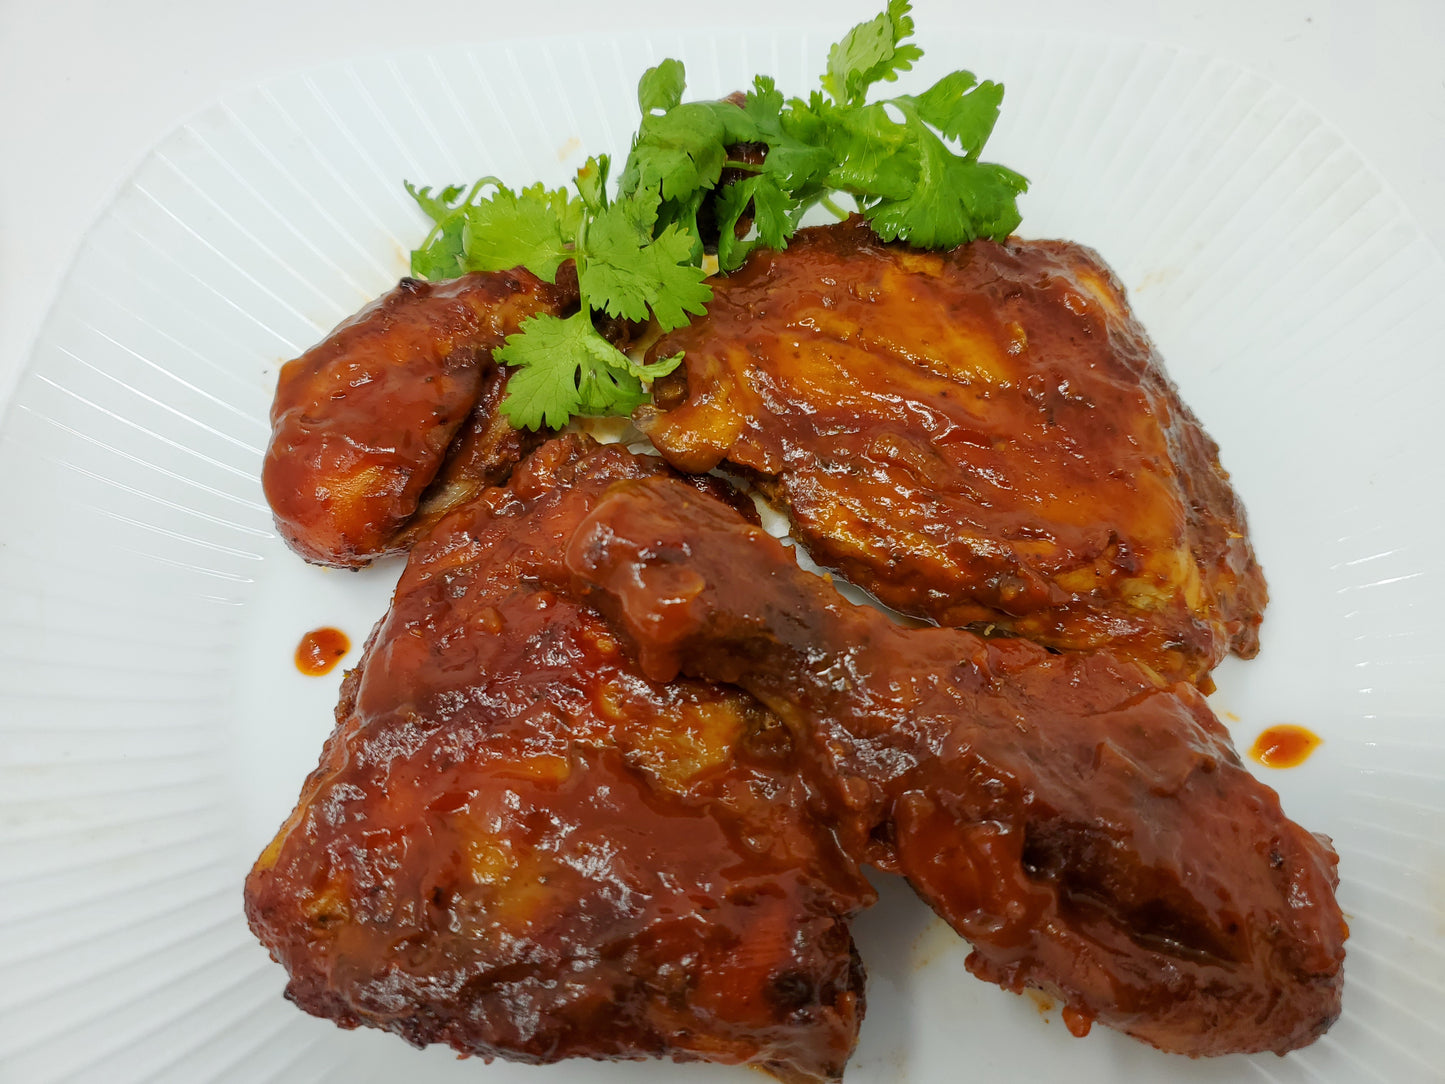 Alima's Oven-Baked BBQ Style Chicken